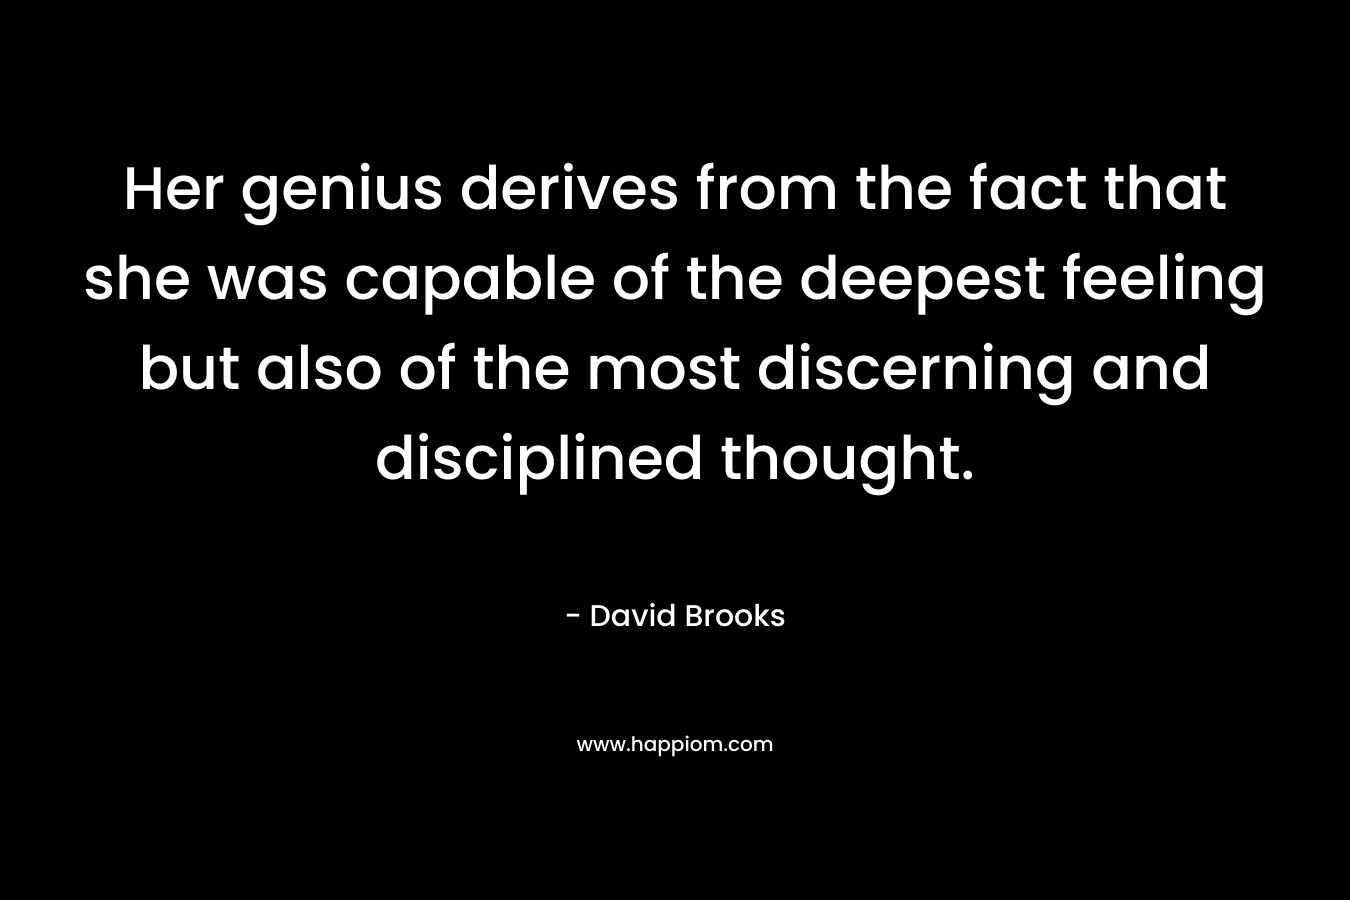 Her genius derives from the fact that she was capable of the deepest feeling but also of the most discerning and disciplined thought. – David Brooks